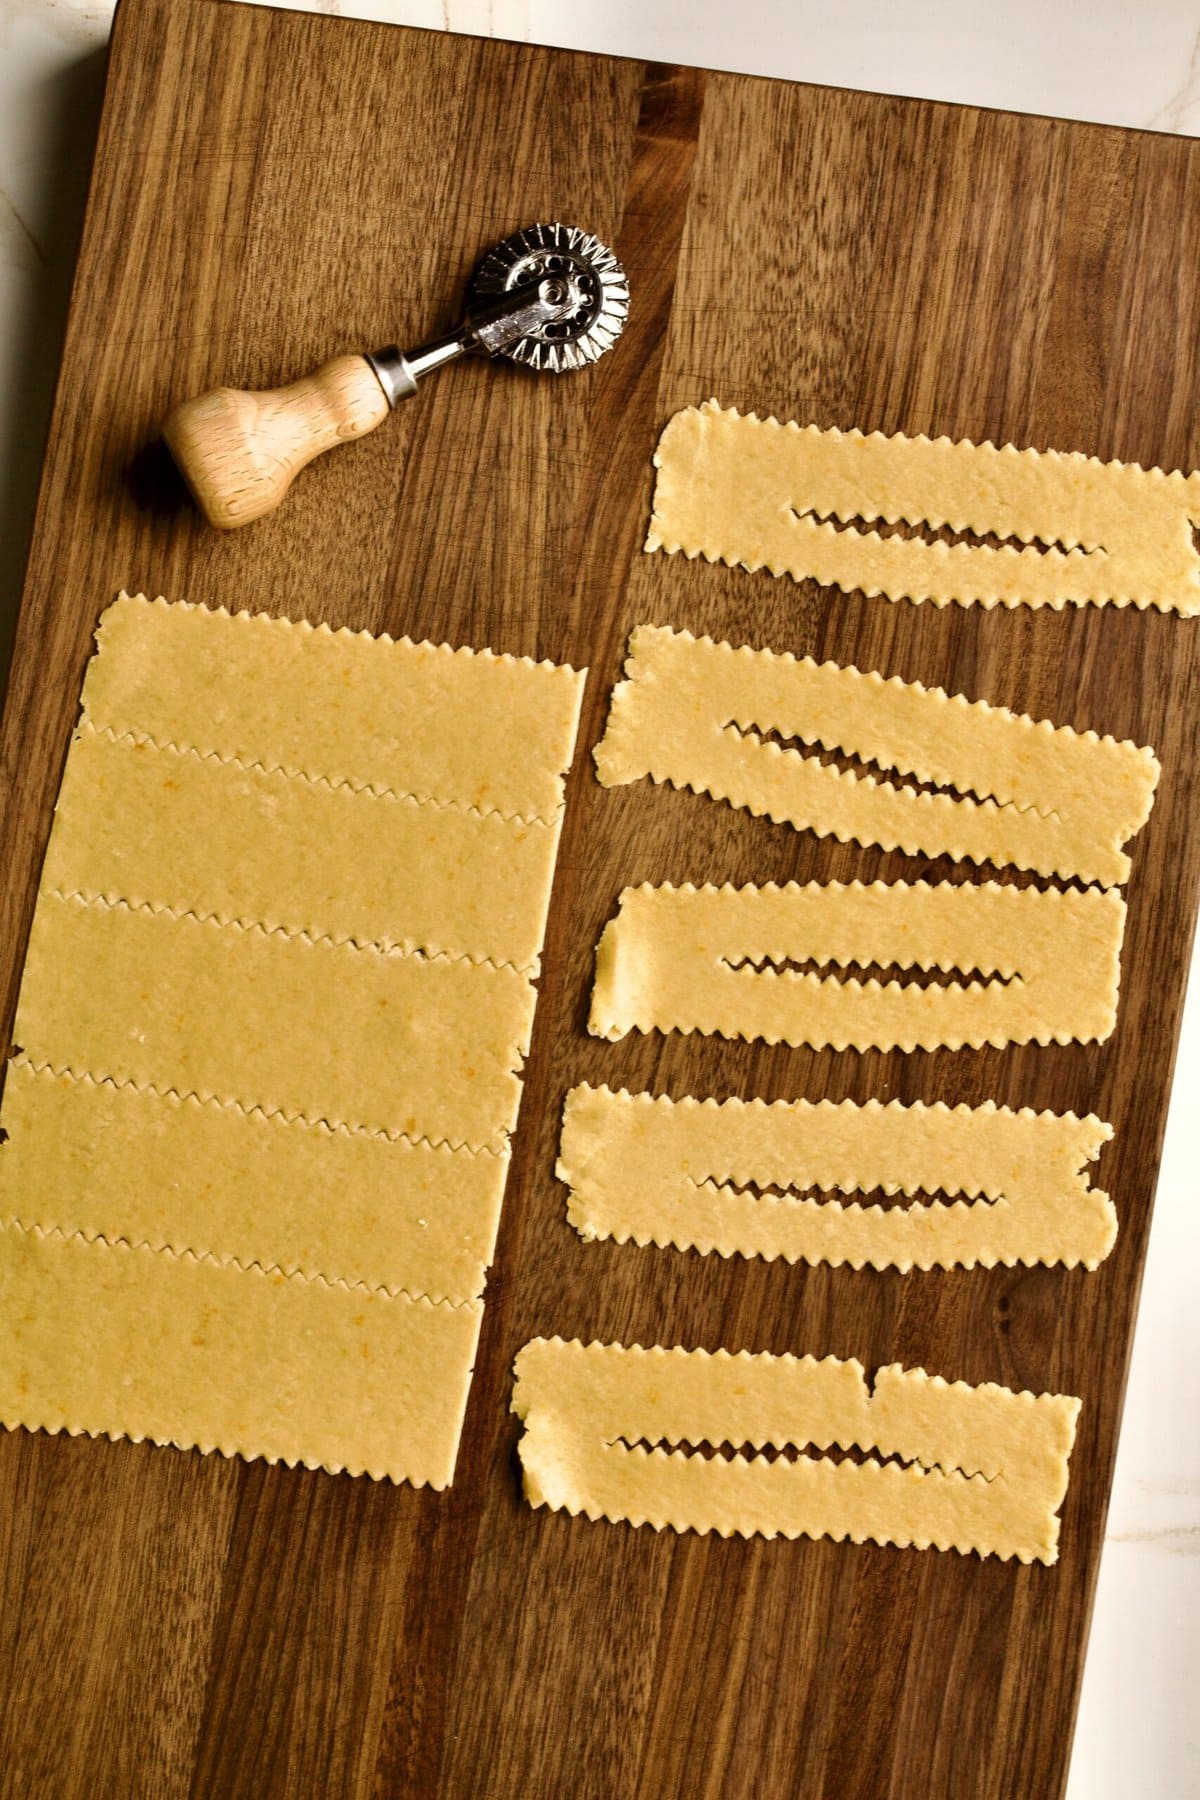 process of making chiacchiere: rcutting the dough into rectangle shapes.